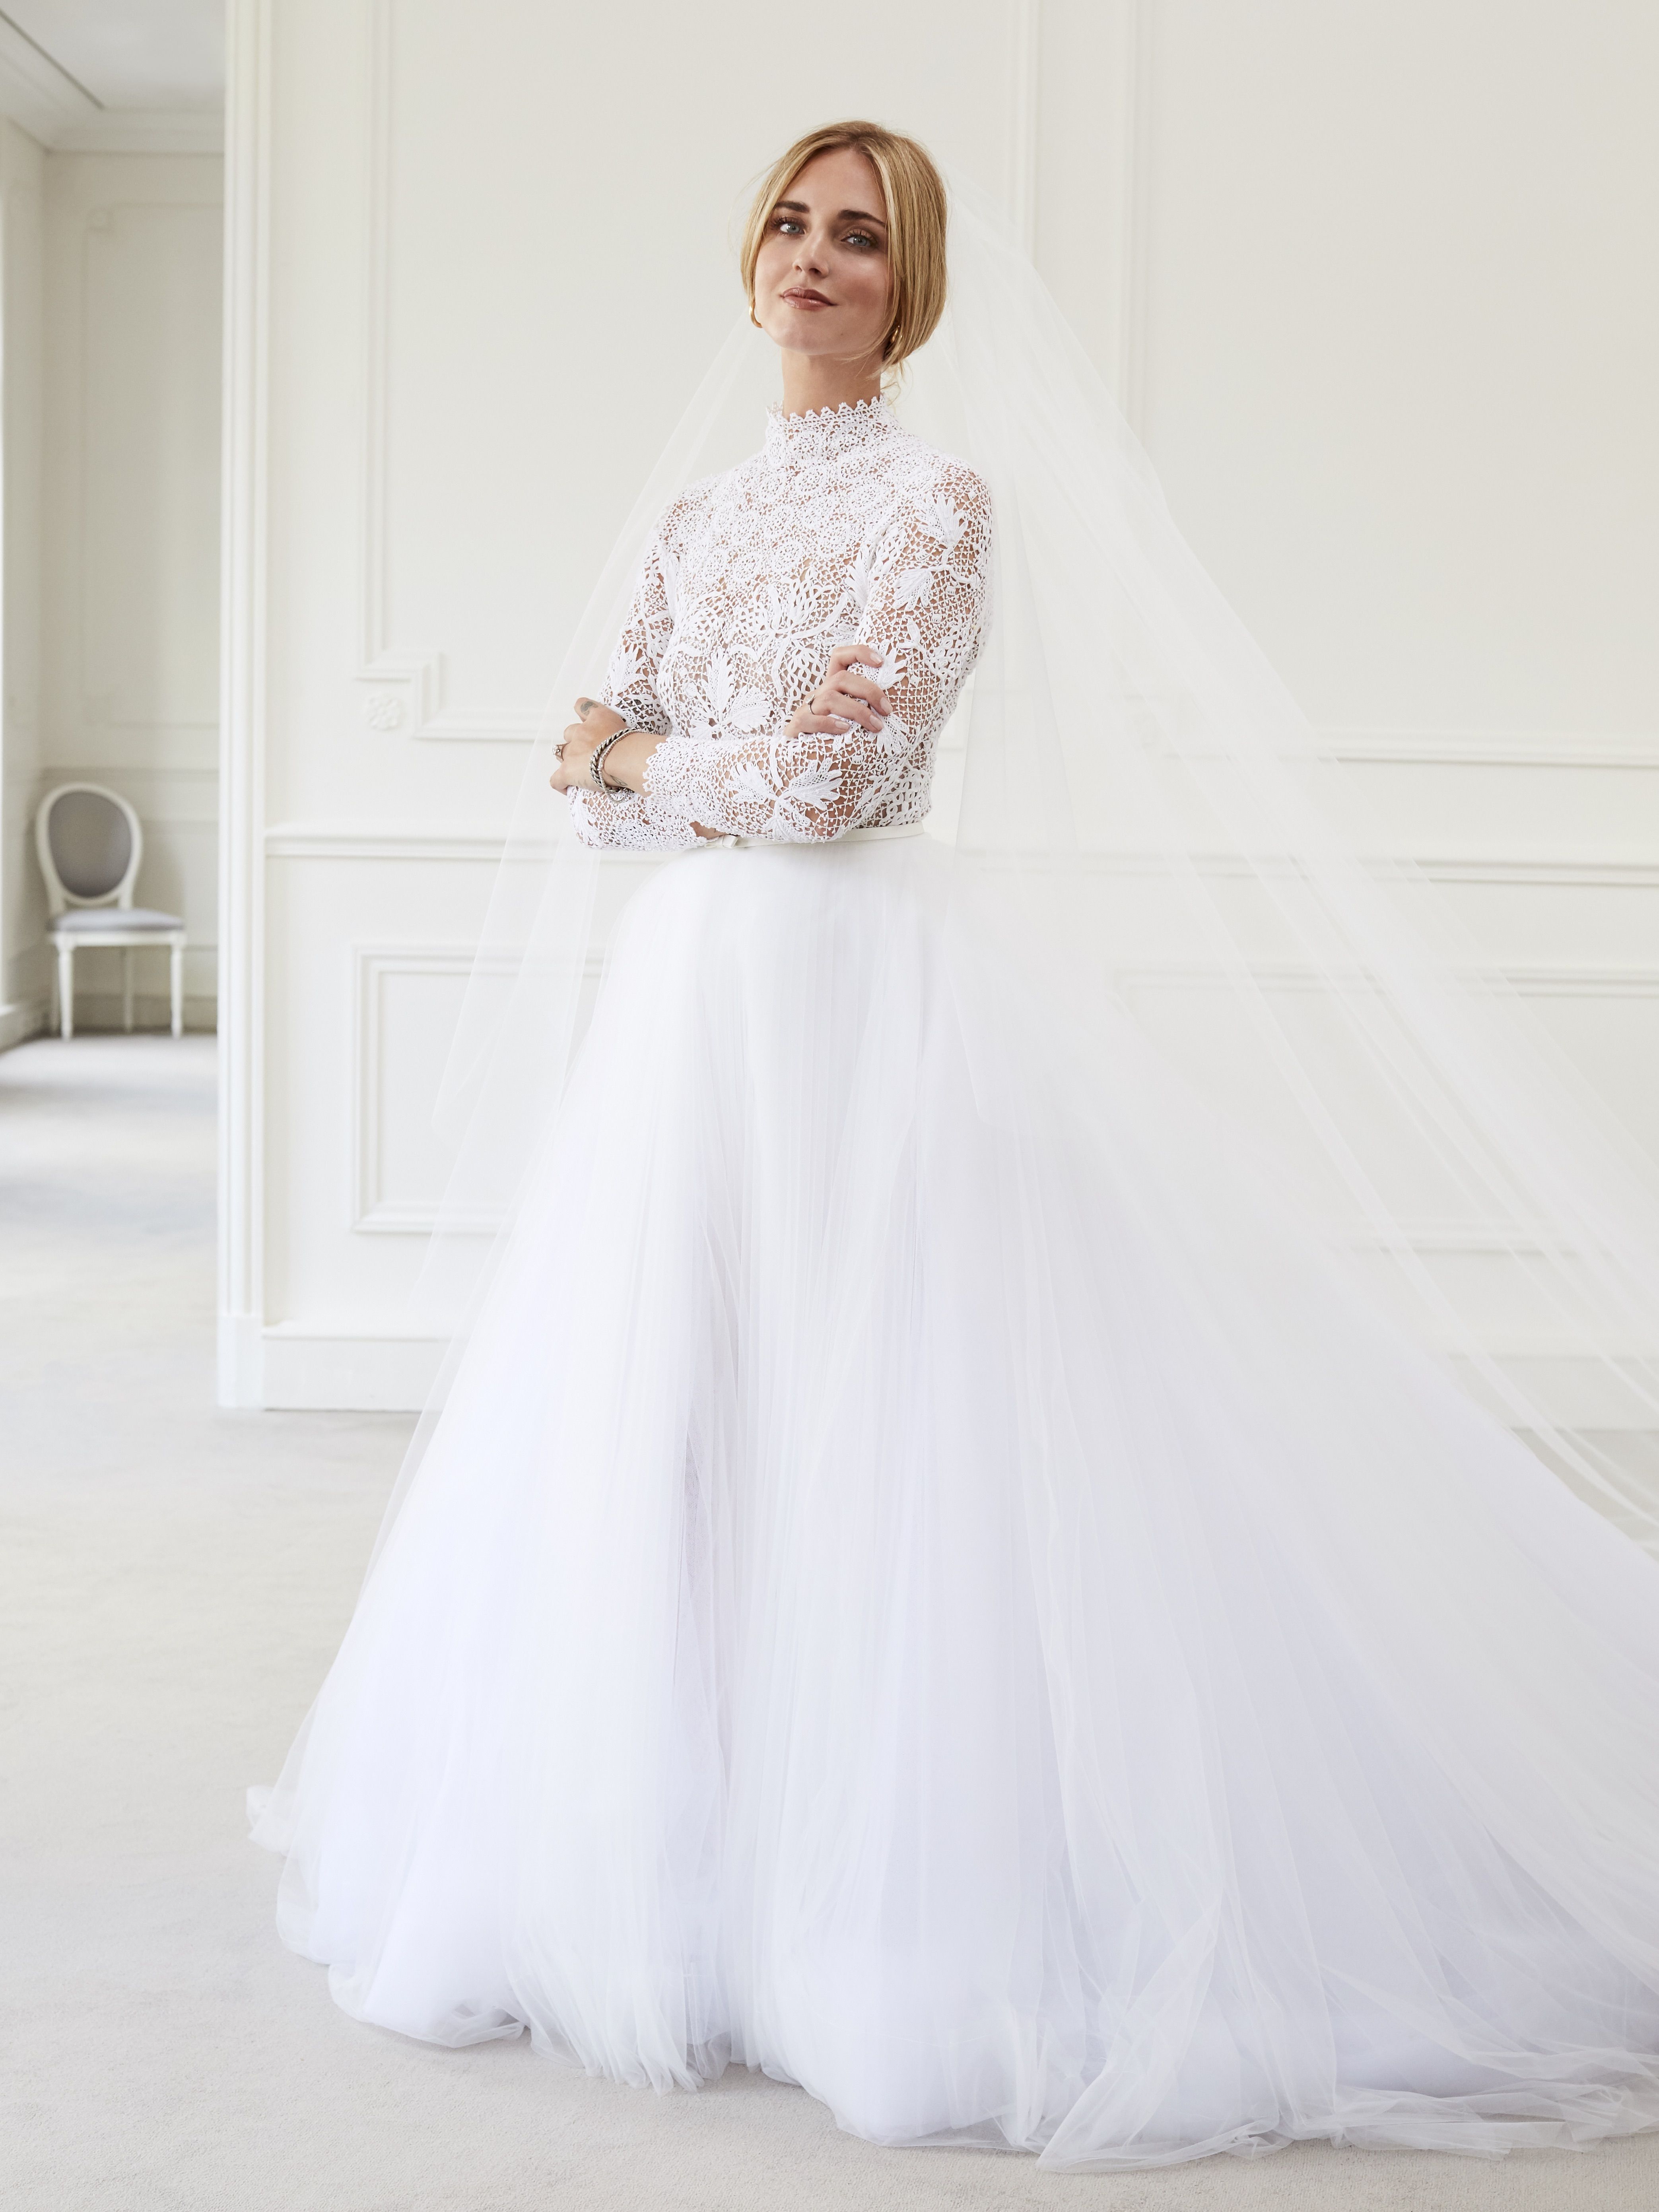 Watch Karlie Klosss Christian Dior Couture Wedding Gown Come Together   Over The Moon